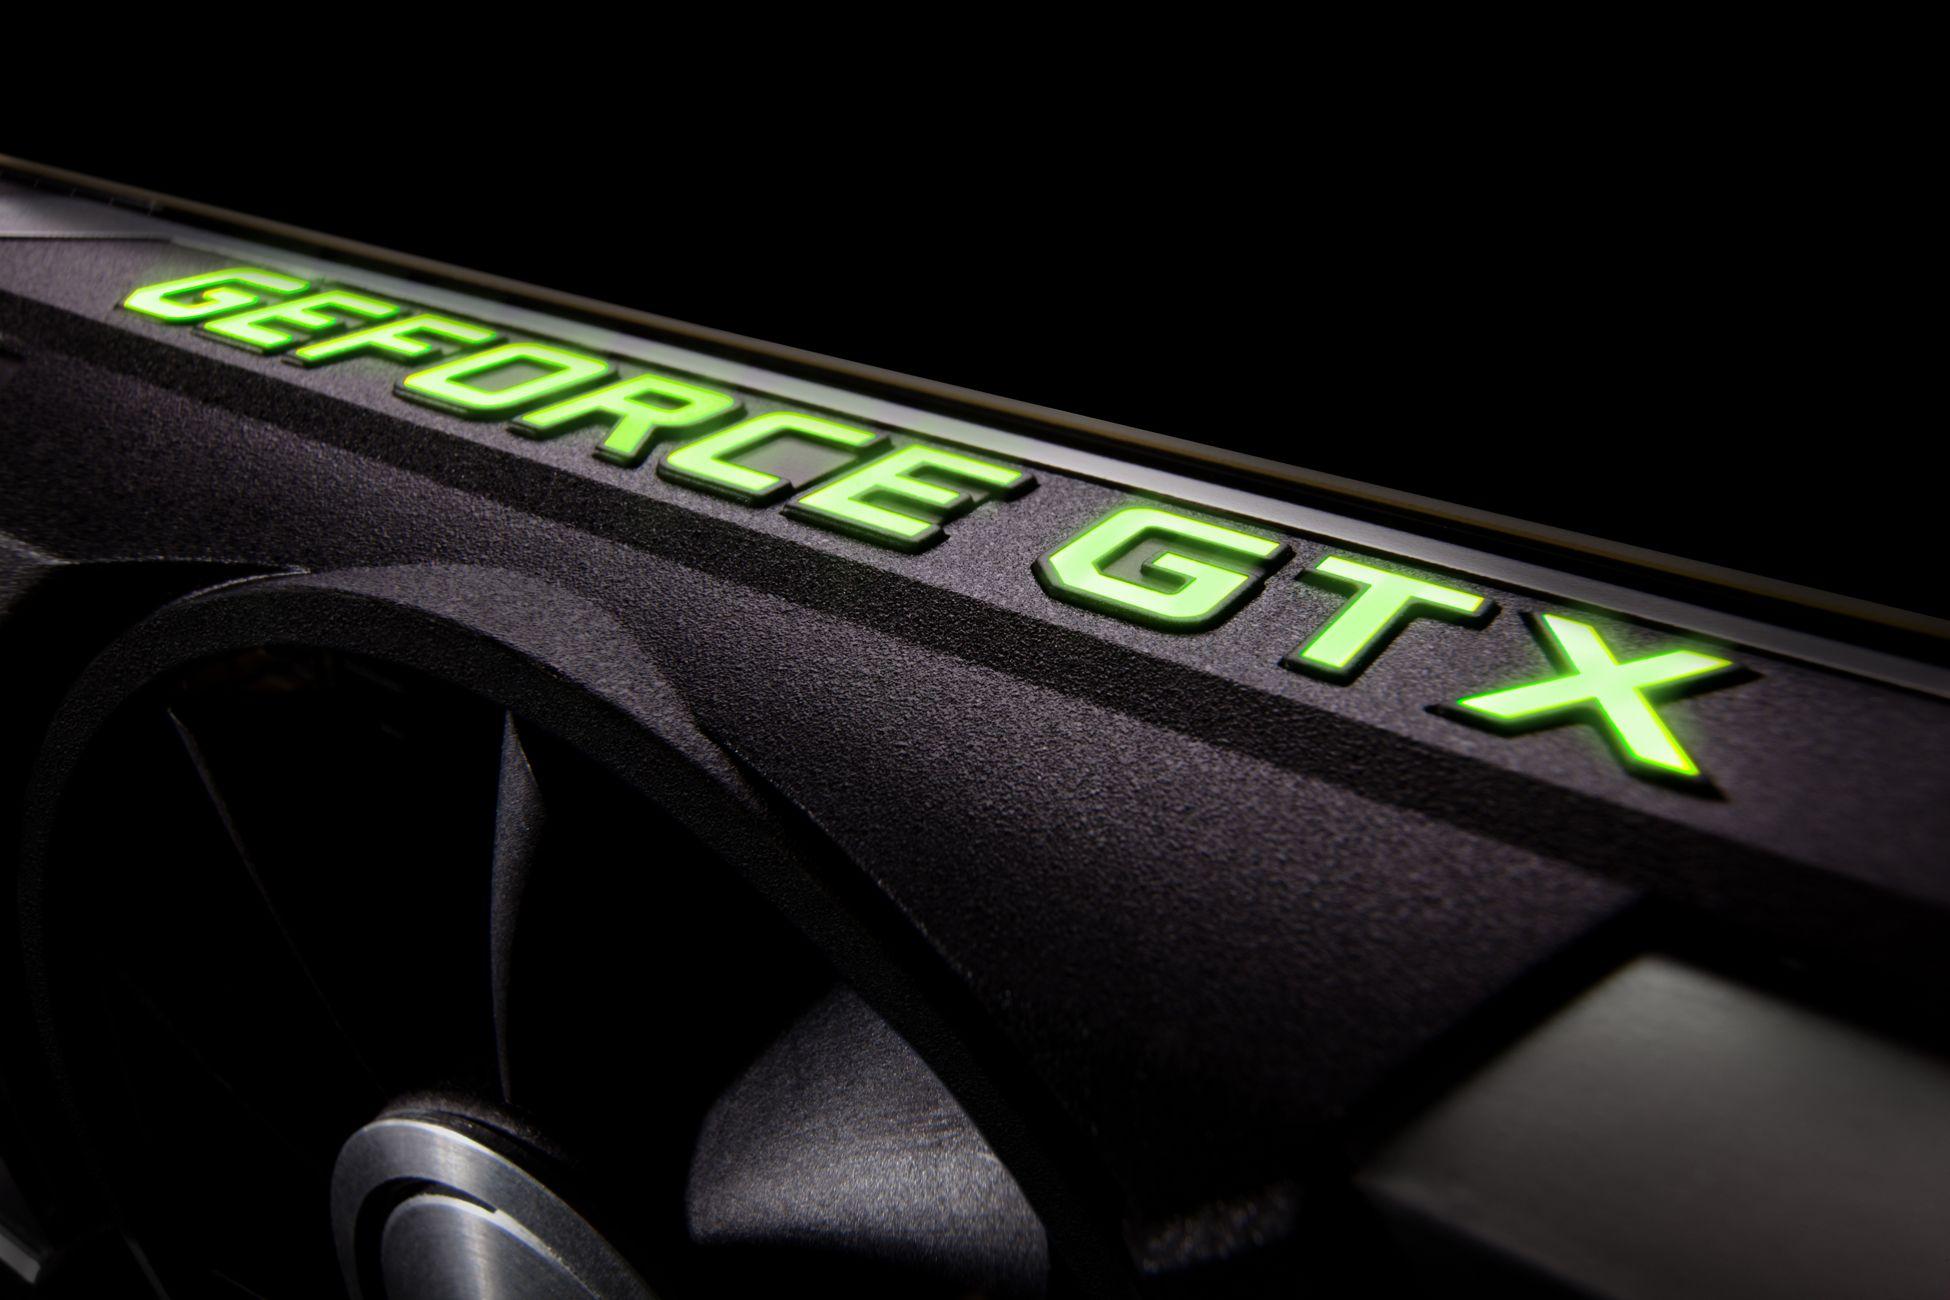 Performance Perfected: Introducing the GeForce GTX 690